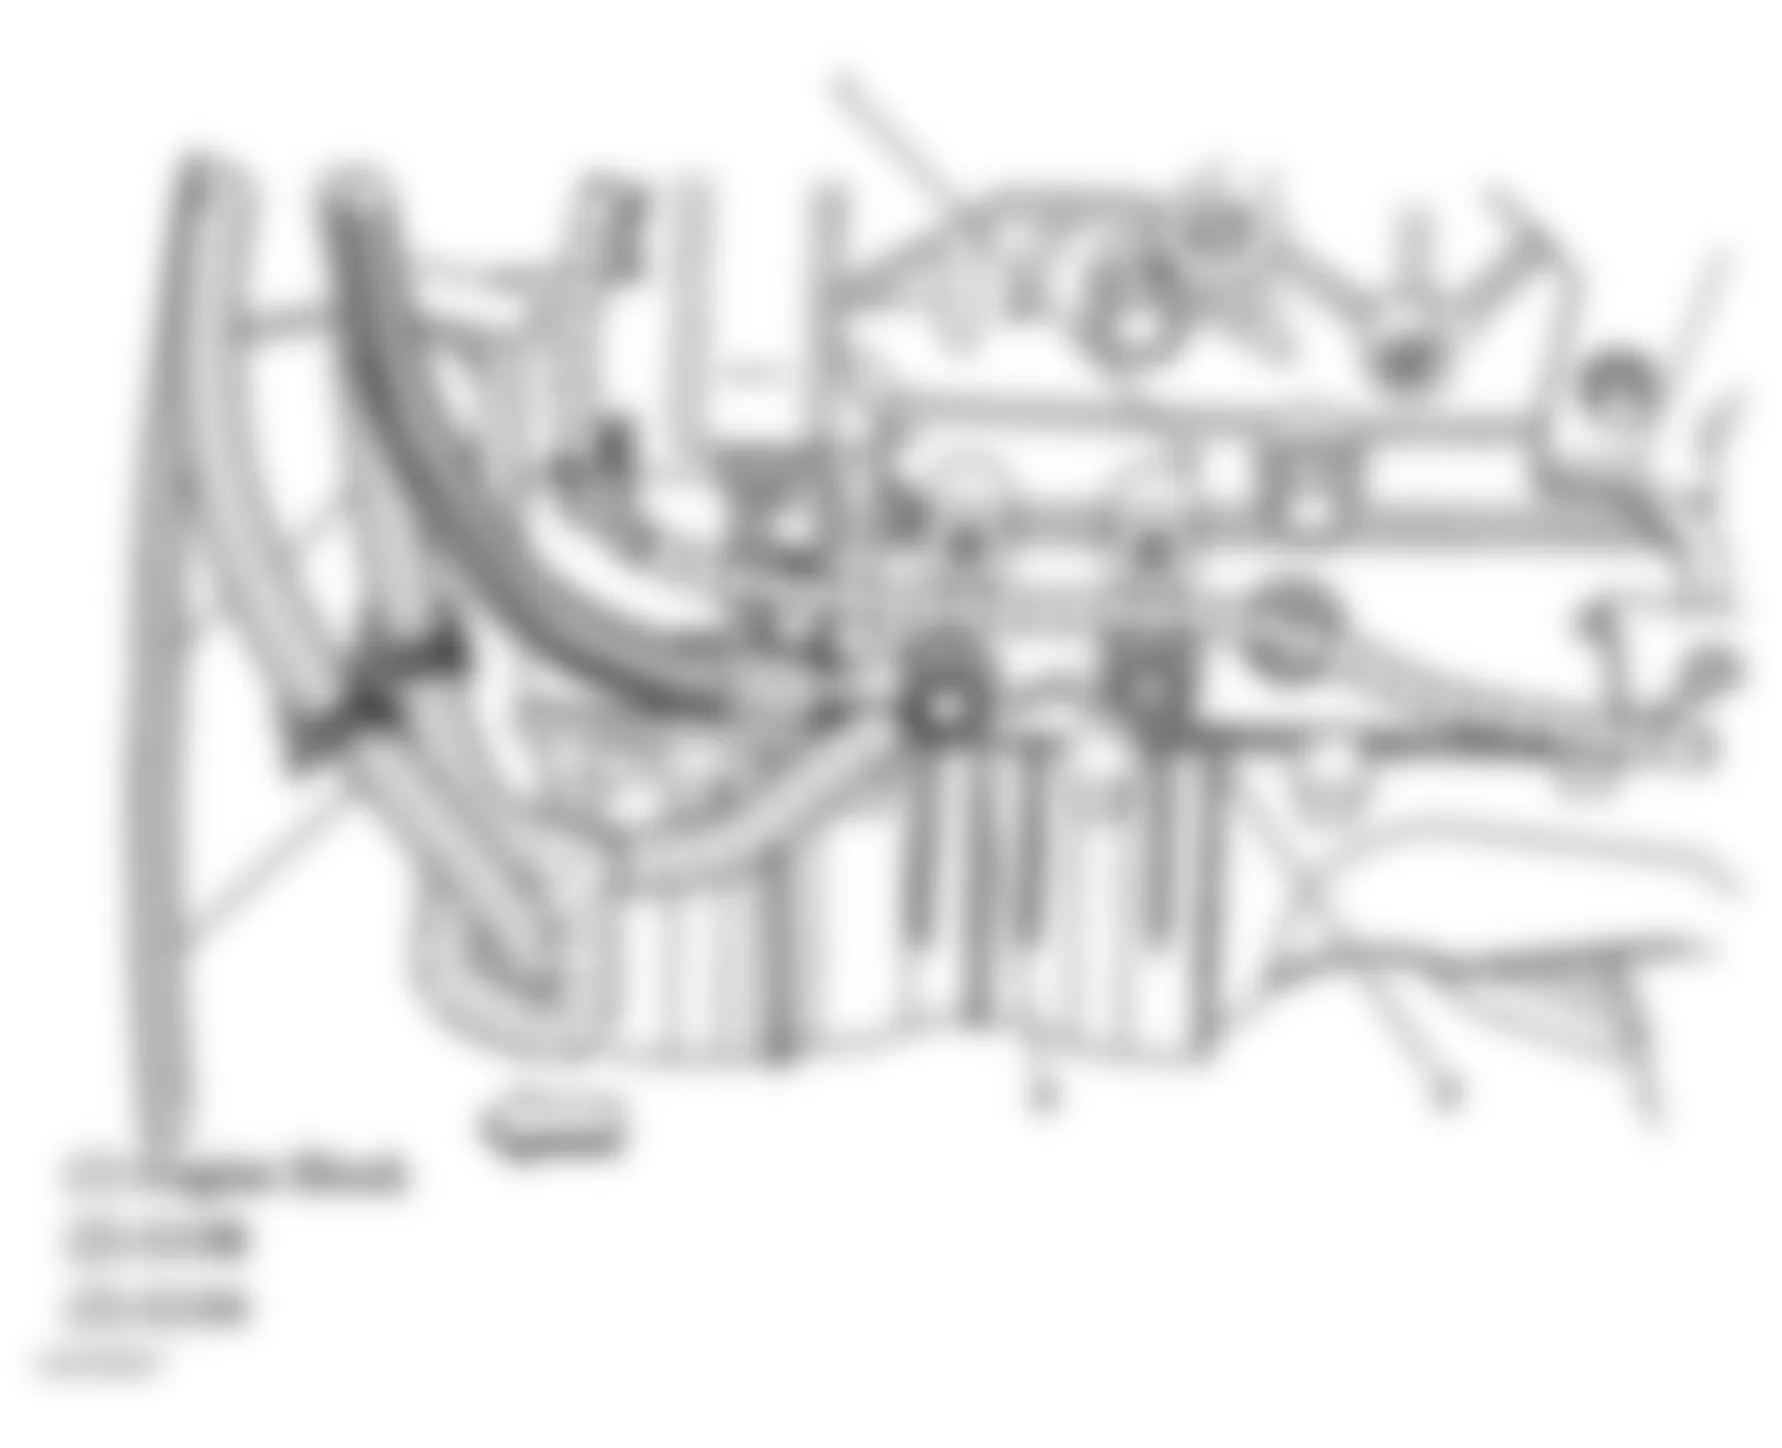 GMC Sierra 3500 2004 - Component Locations -  Lower Left Side Of Engine (6.6L)